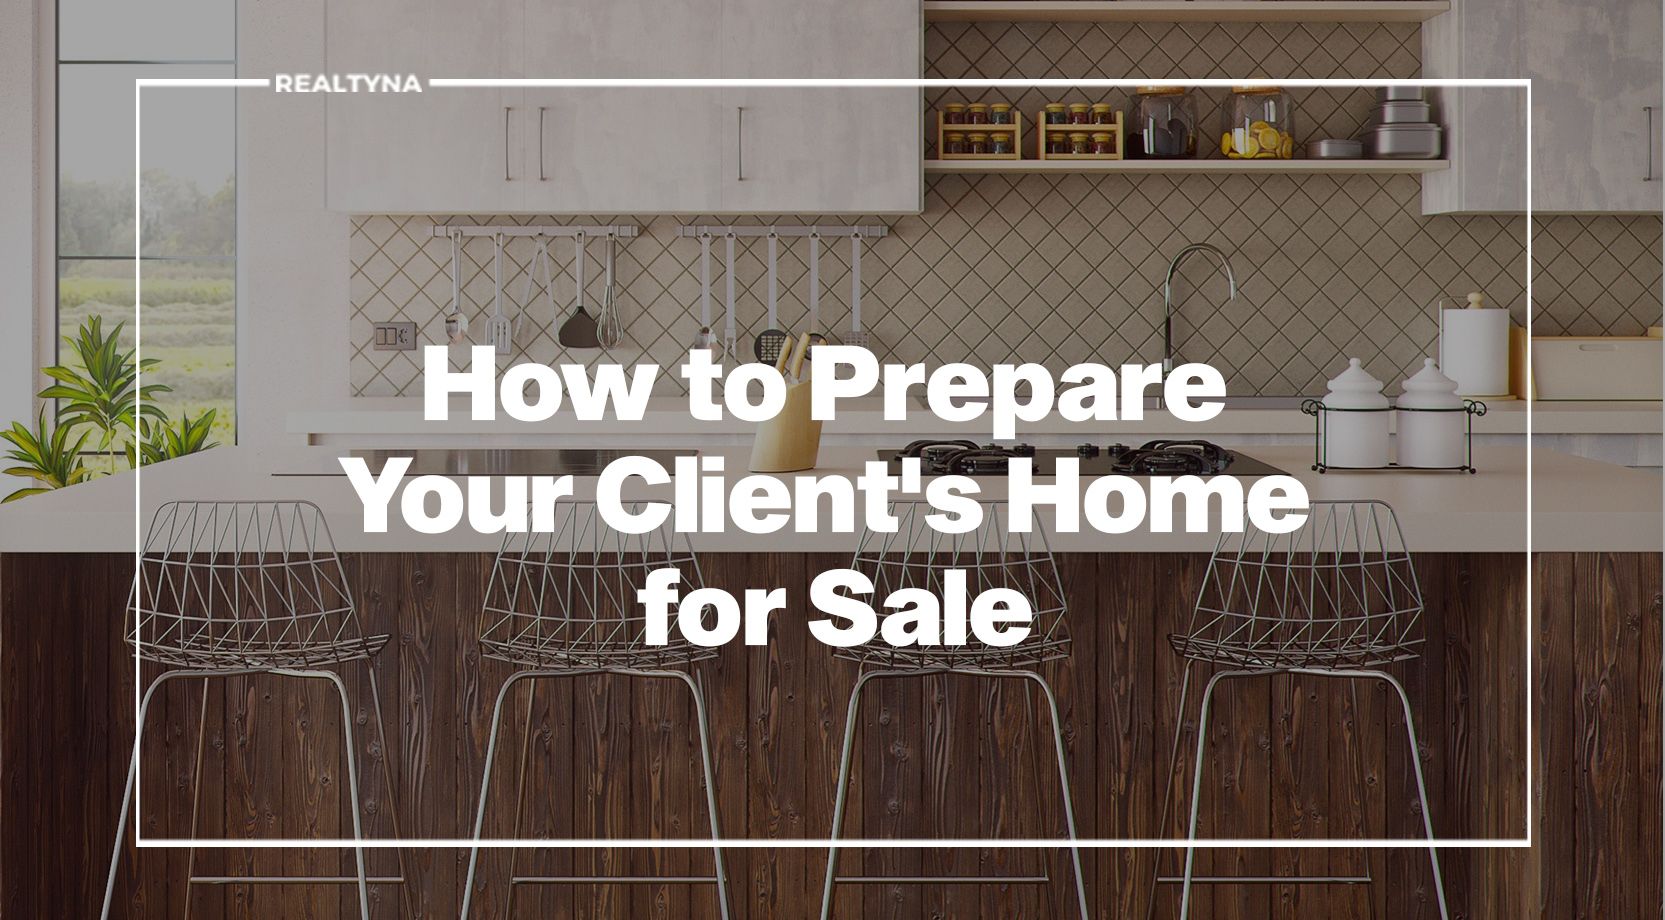 How to Prepare Your Client's Home for Sale